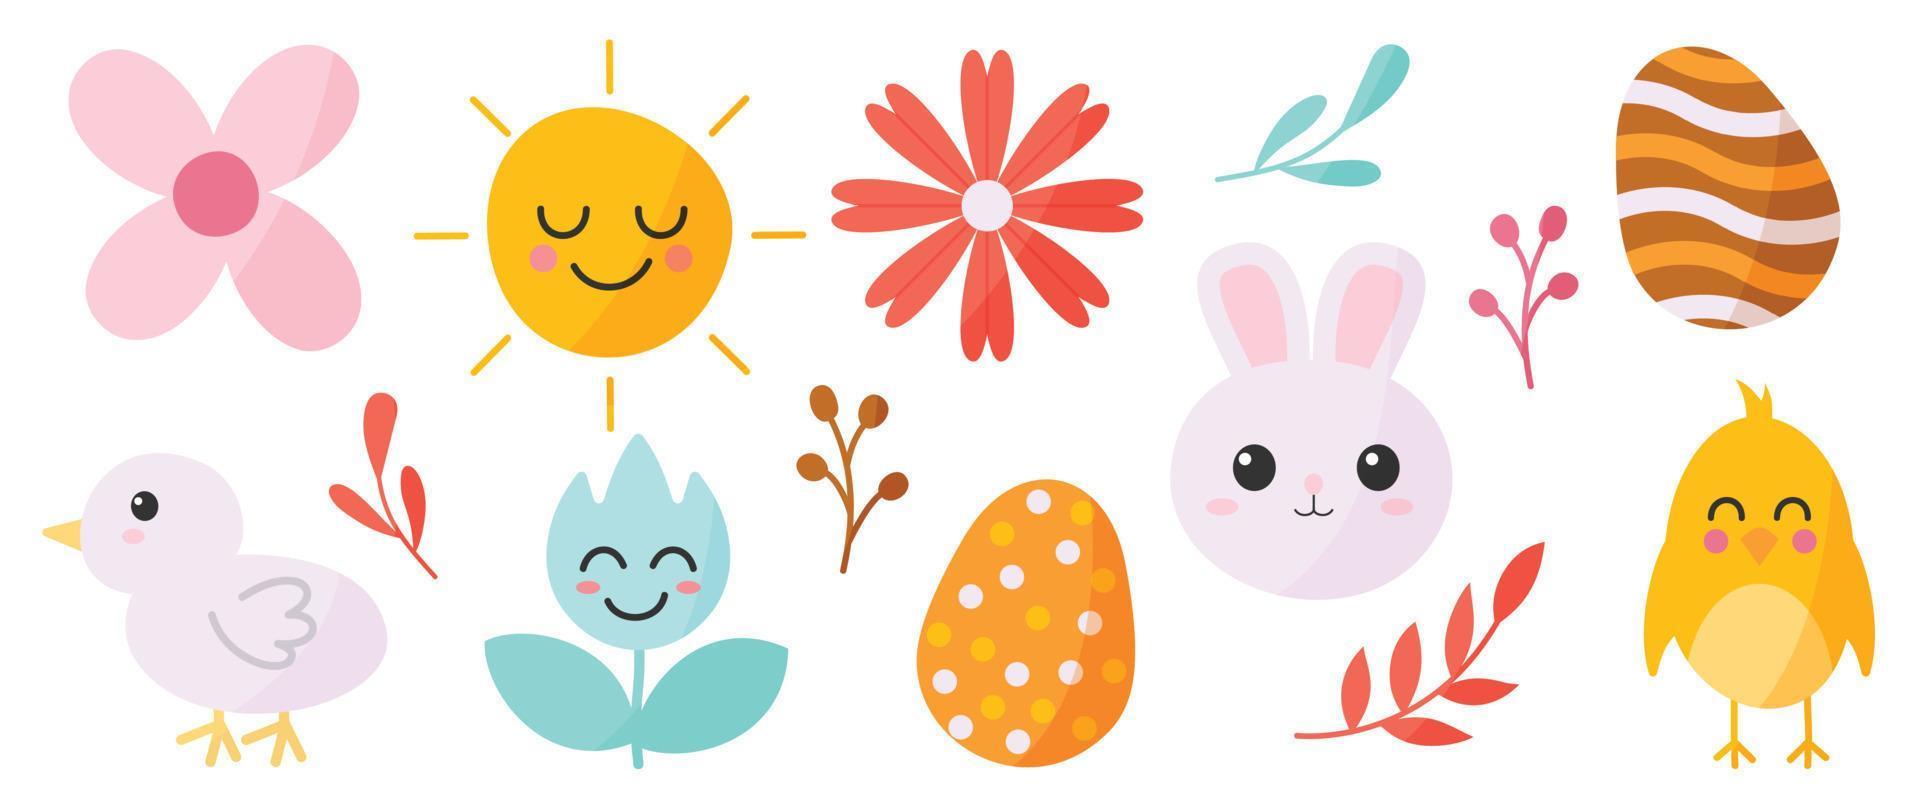 Happy Easter comic element vector set. Cute hand drawn rabbit, chicken, easter egg, sun, spring, tulip flower, leaf branch. Collection of doodle animal and adorable design for decorative, card, kids.